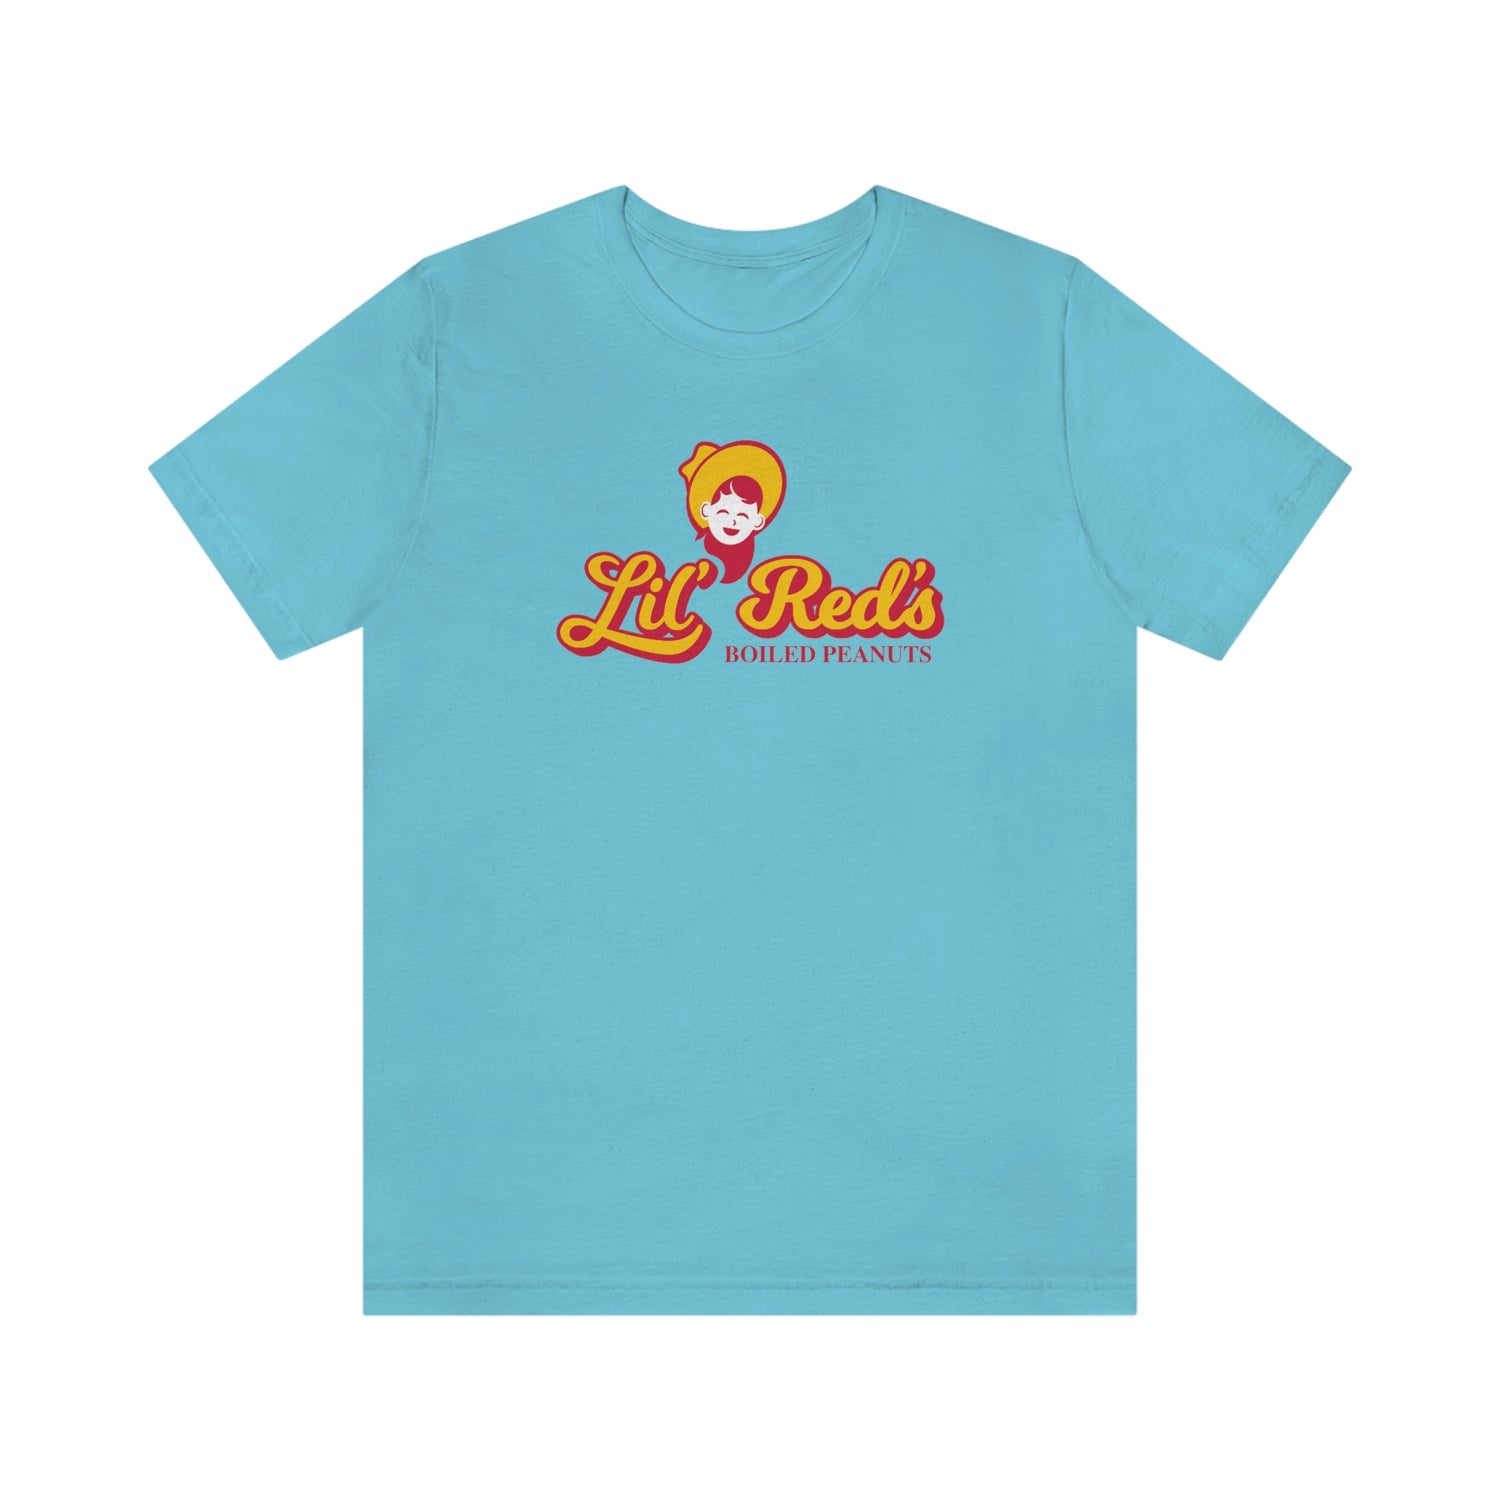 Lil' Red's Boiled Peanuts Logo T-Shirts